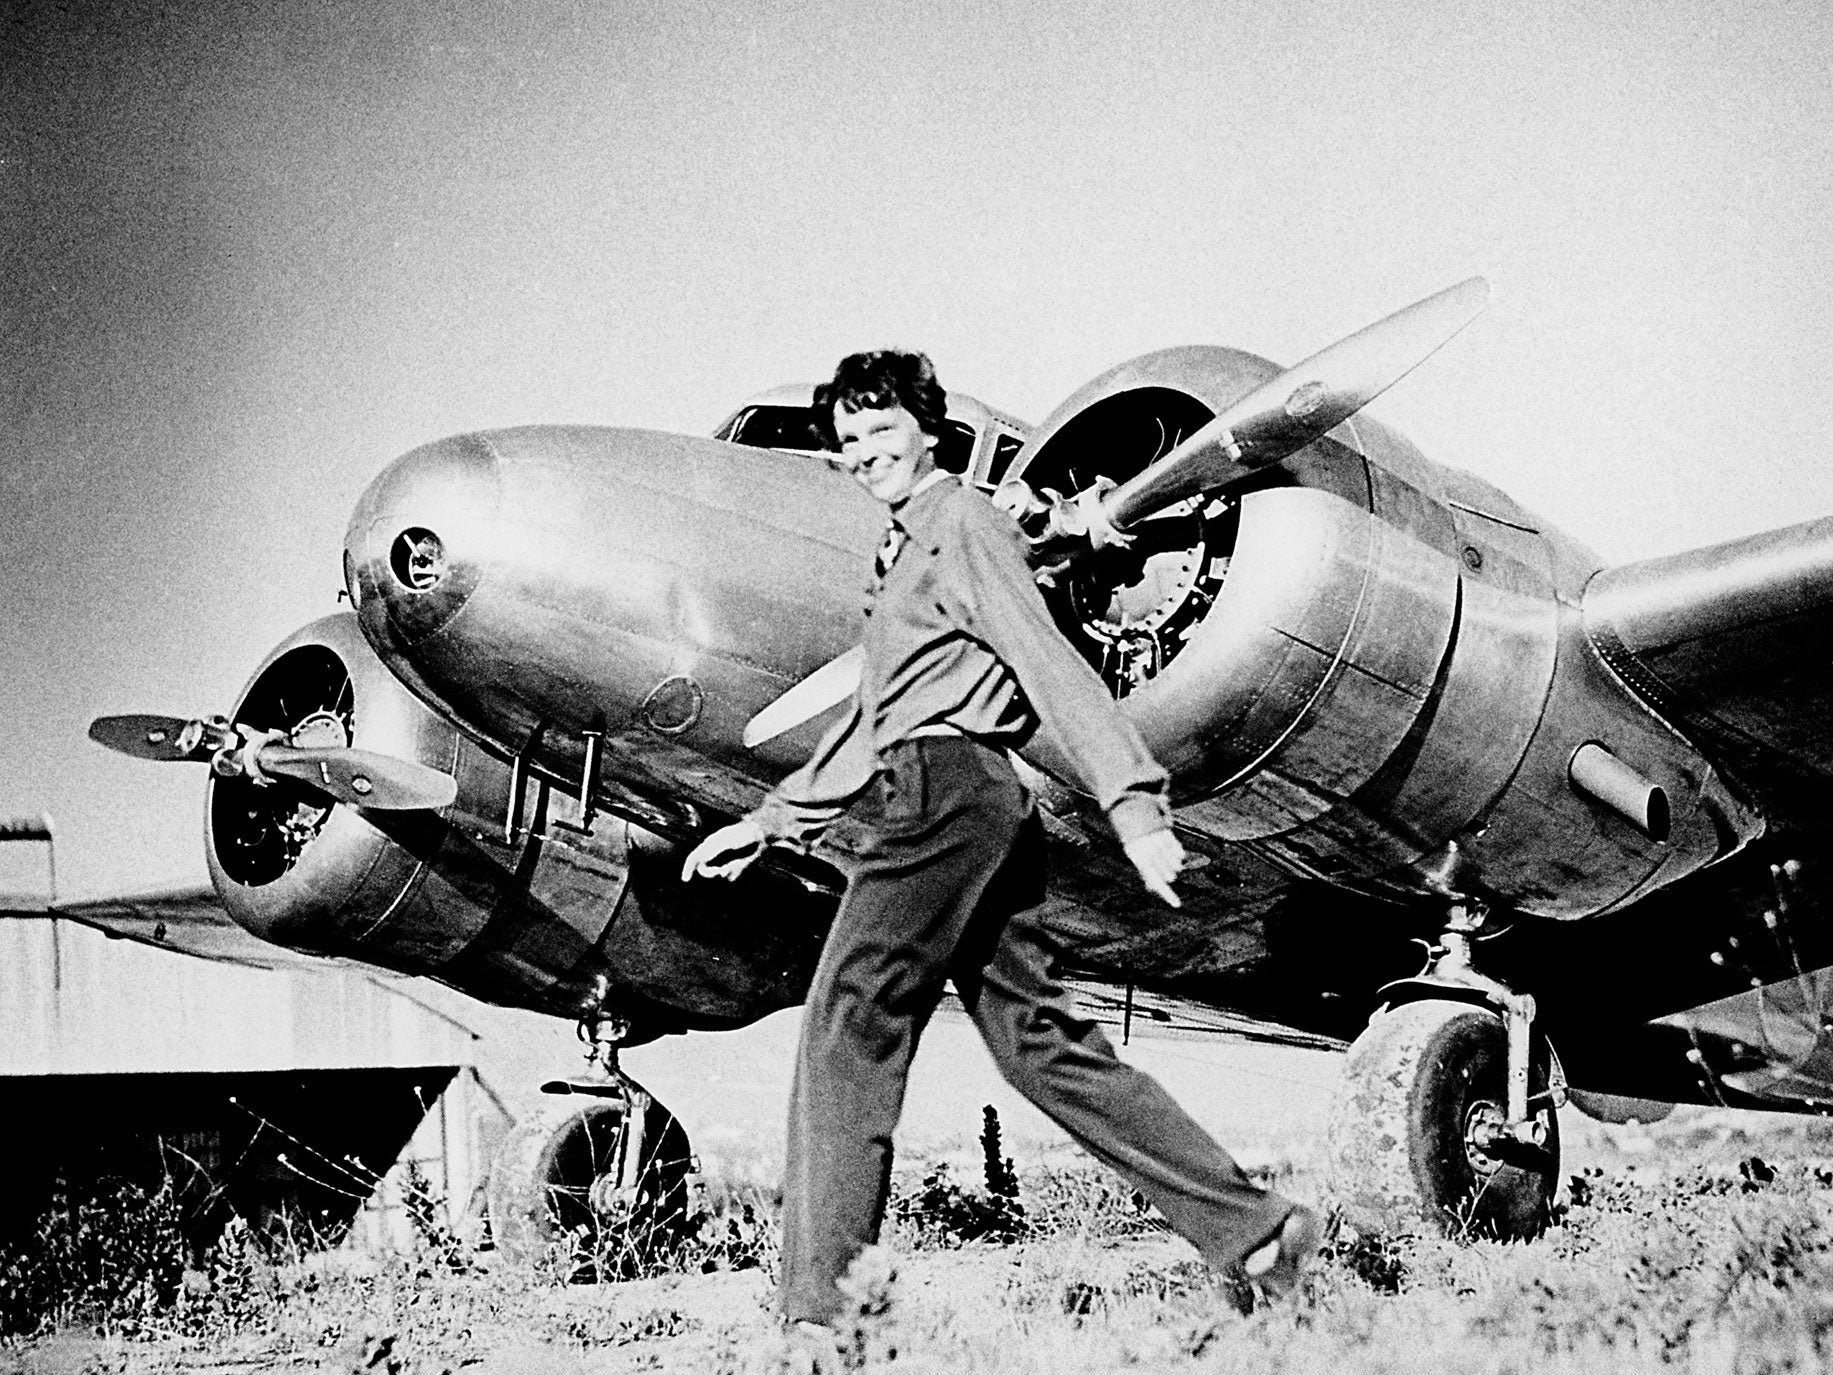 What was Amelia Earhart doing when she disappeared in 1937?